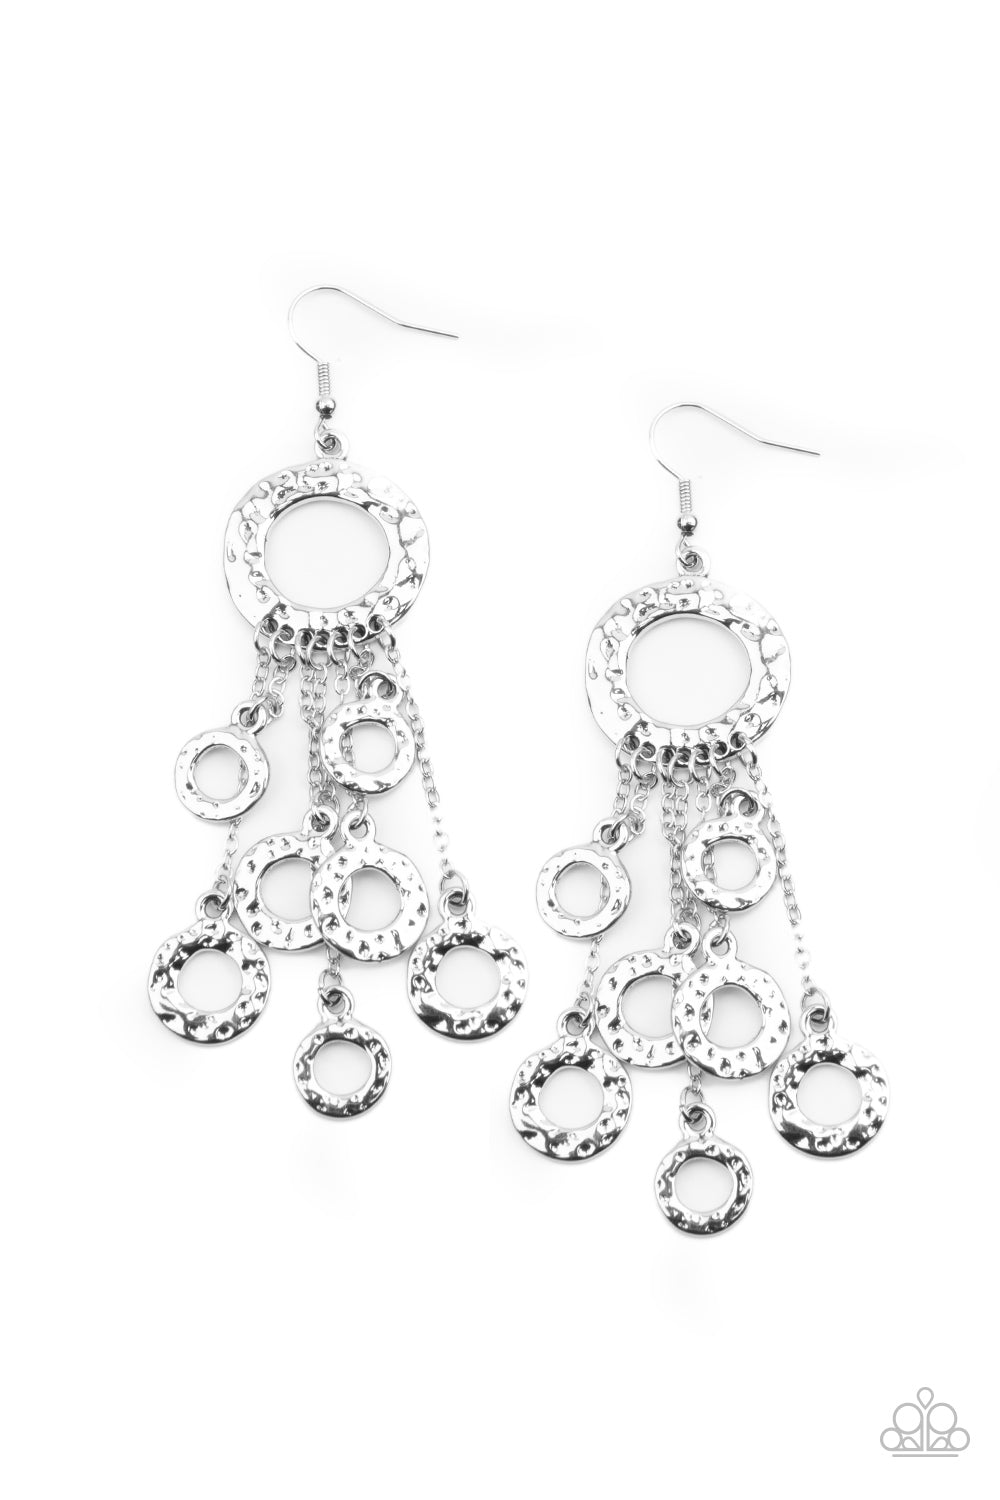 Dangle Earrings - Paparazzi Right Under Your NOISE - Silver Earrings Paparazzi jewelry image